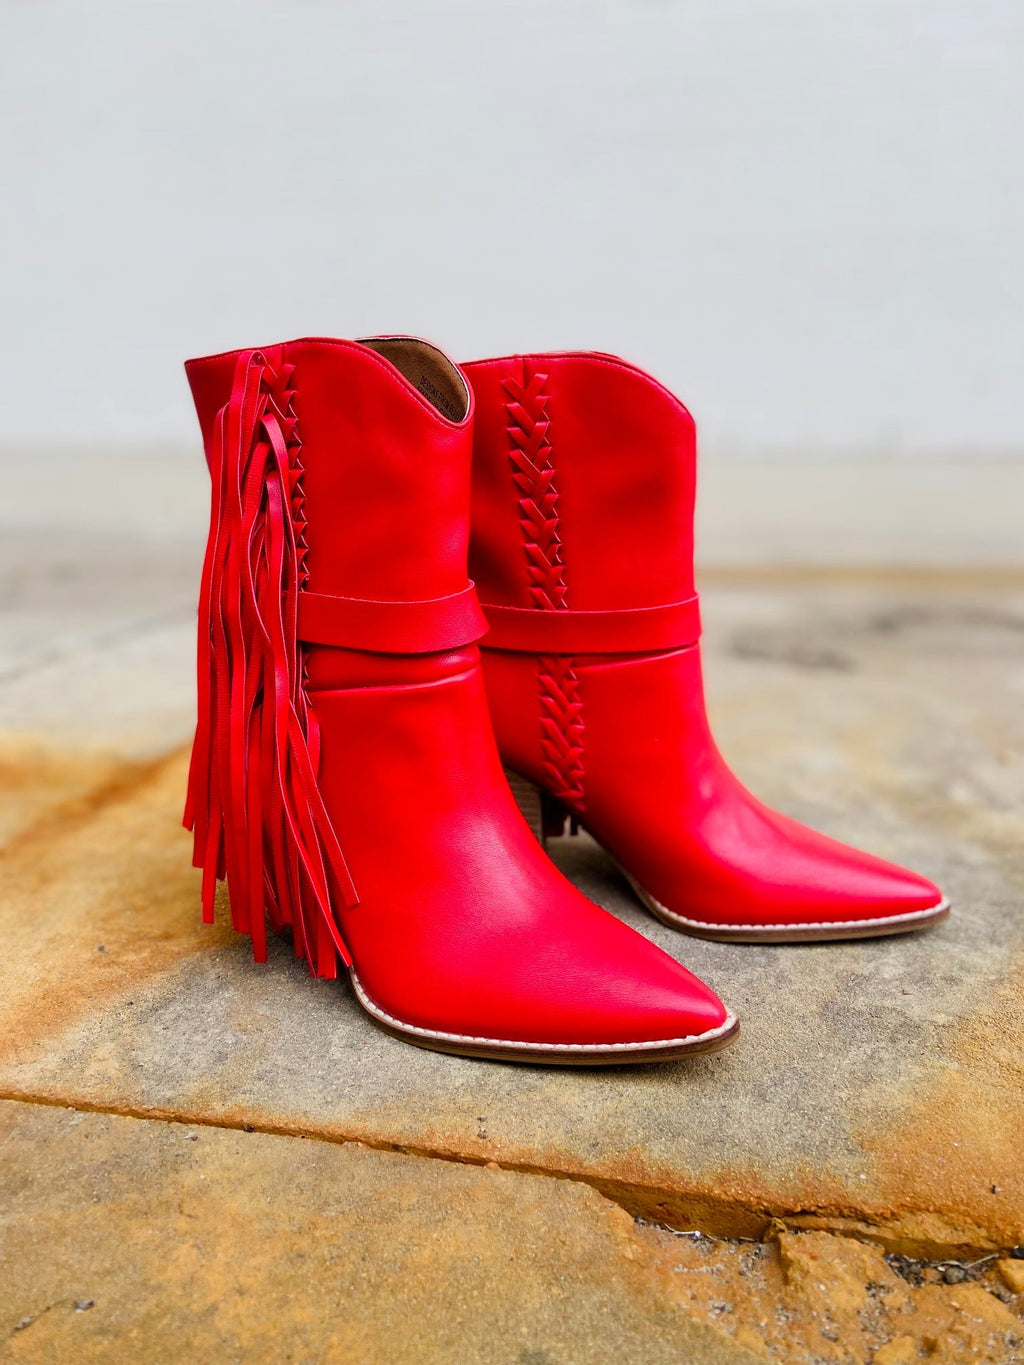 Slip into something a little saucy with these Lady in Red Boots! The ultra-casual fringe-covered booties have a classic western style with a flirty pointed toe, red leather whipstitching and a sassy 3" wood heel, for a look that stands 10" tall. Show 'em who's boss with a splash of daring red!